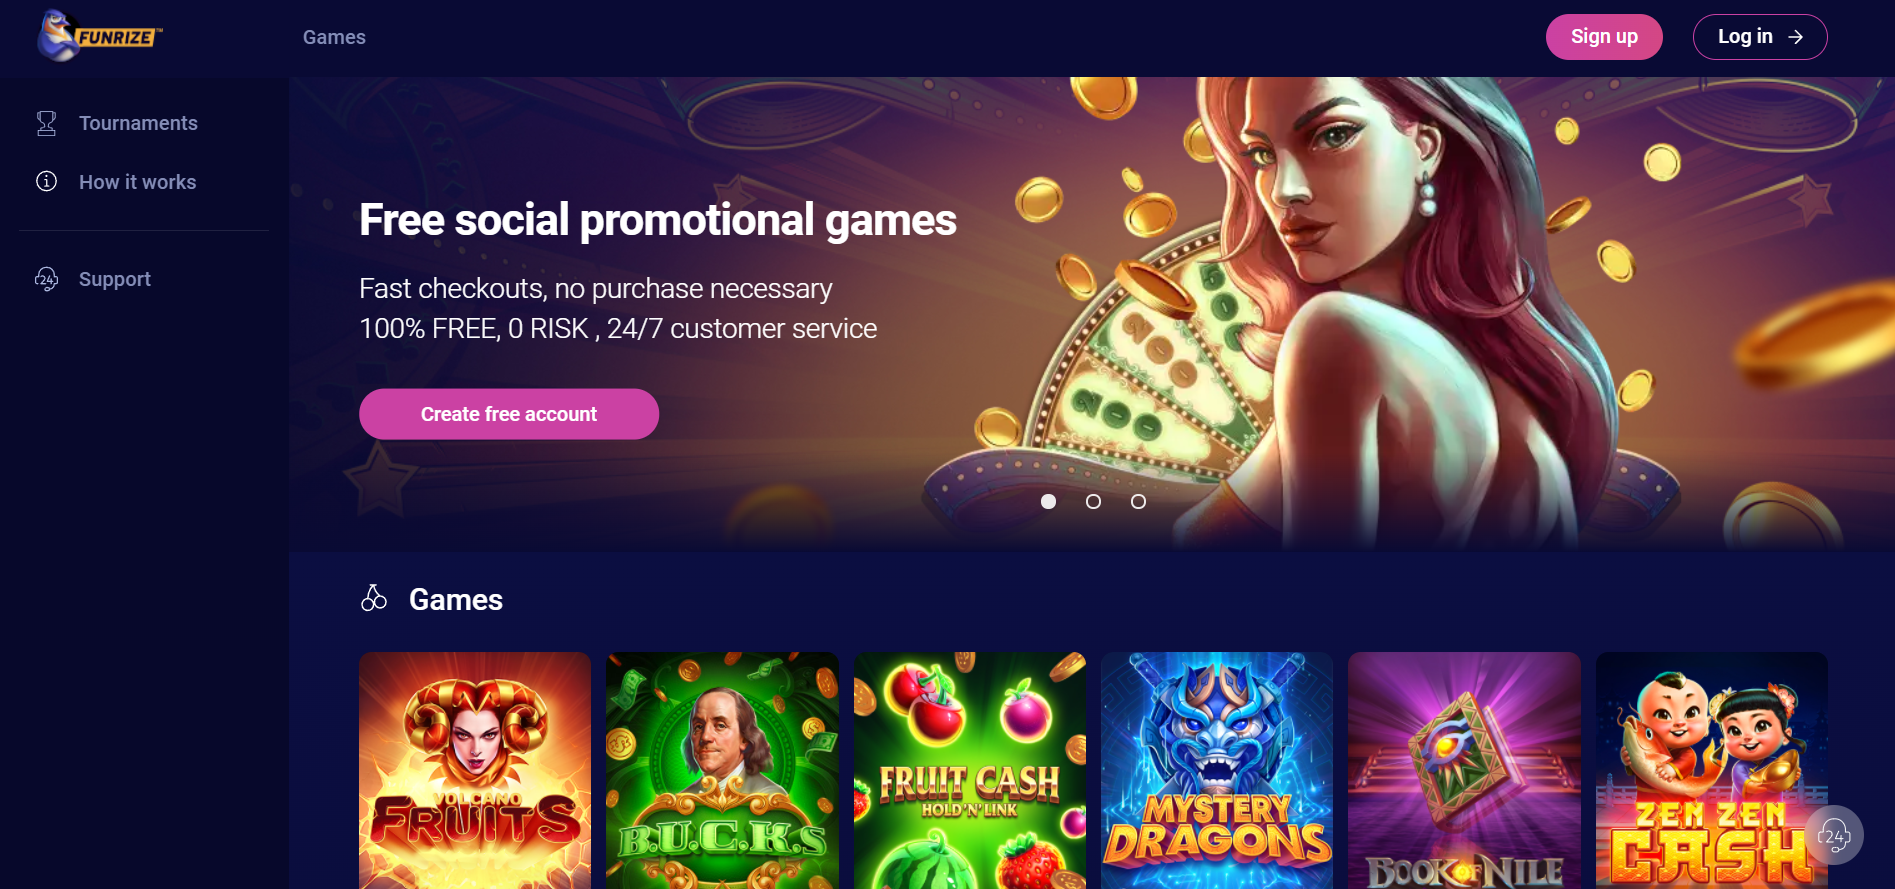 Why online casino paypal bonus Is No Friend To Small Business